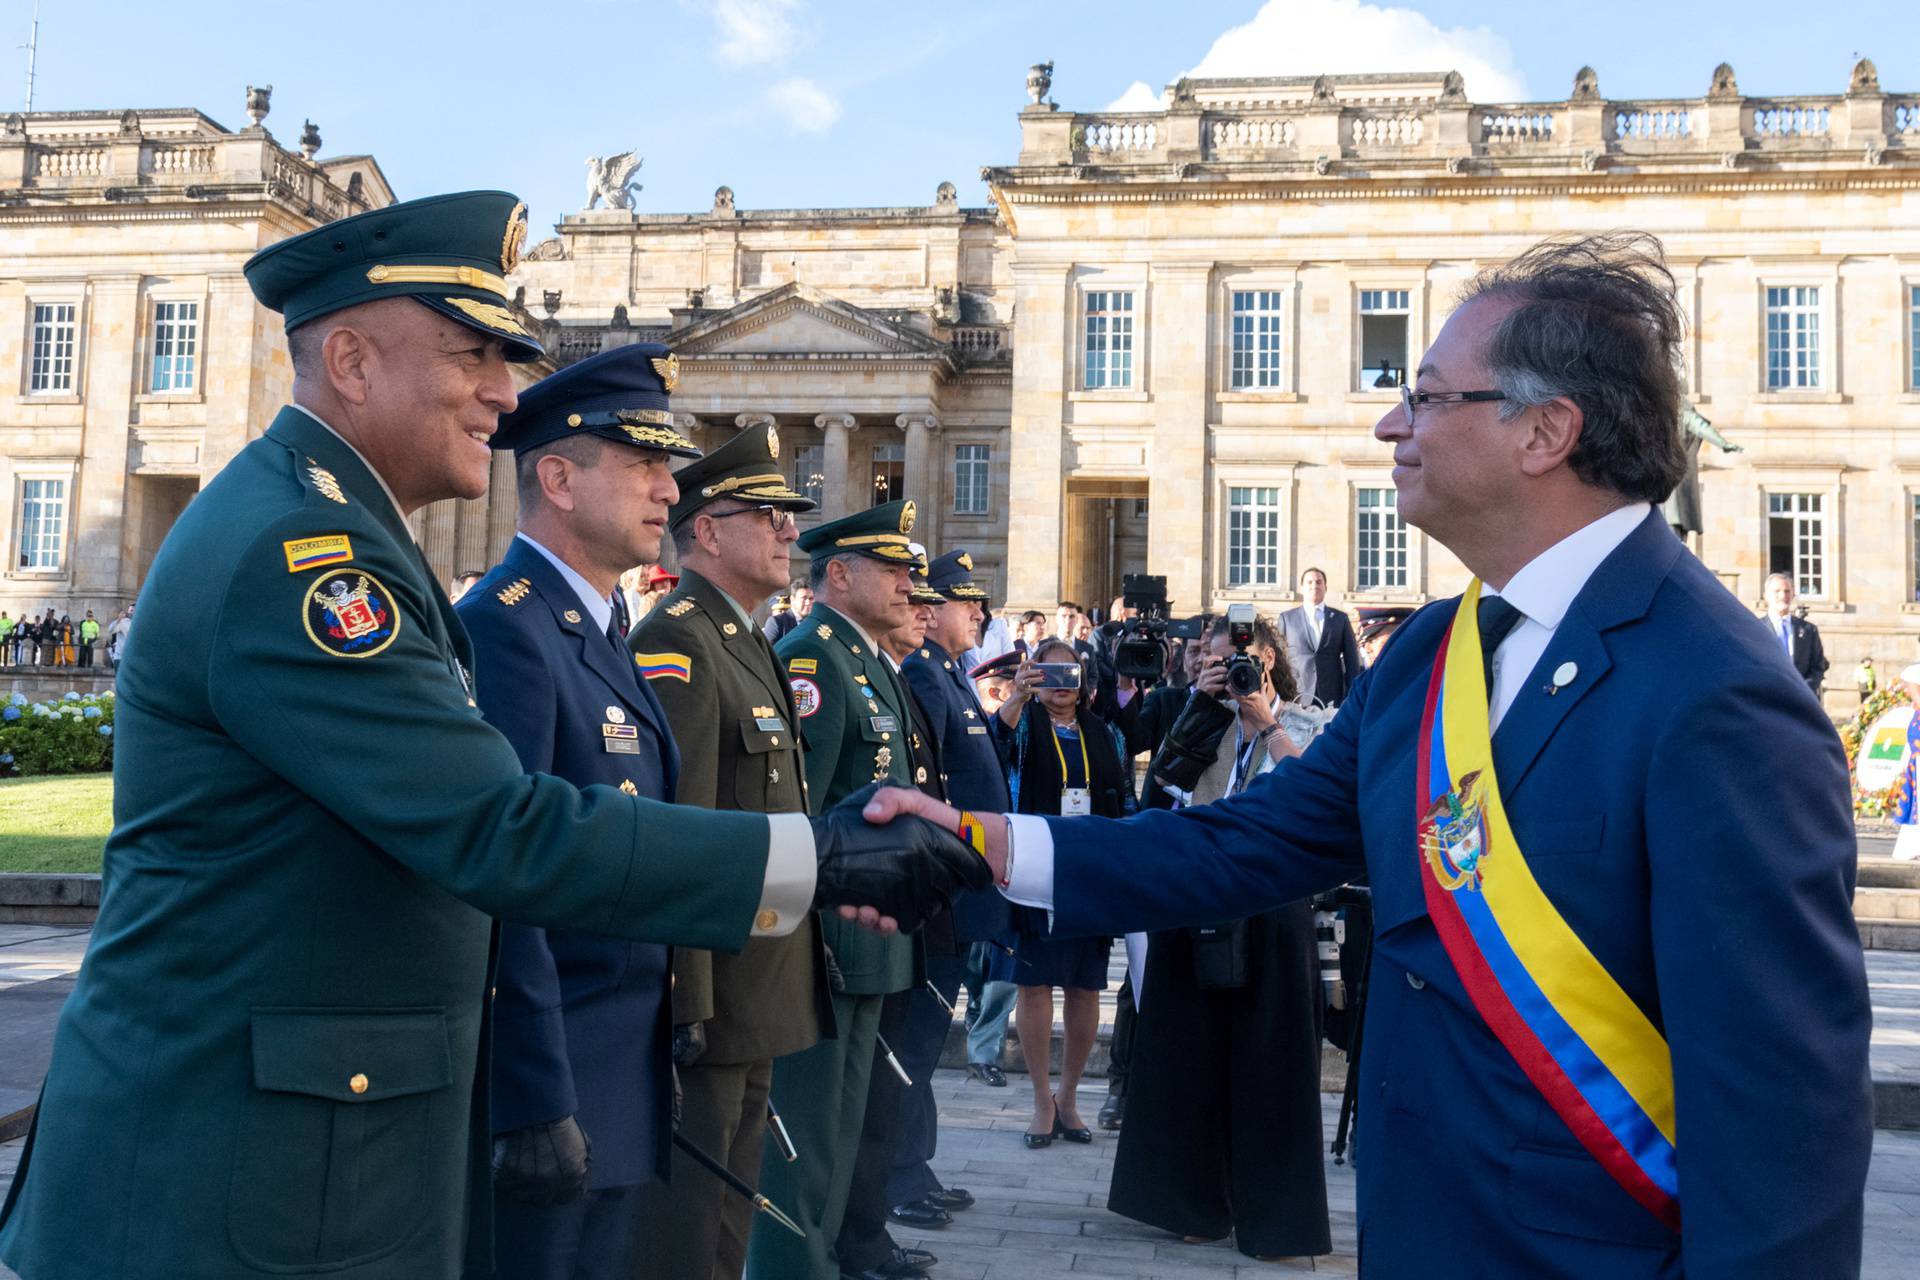 Colombian President Gustavo Petro and Commander of the Colombian Military Forces, General Luis Fernando Navarro shake hands after his swearing-in ceremony at Plaza de Bolivar, in Bogota